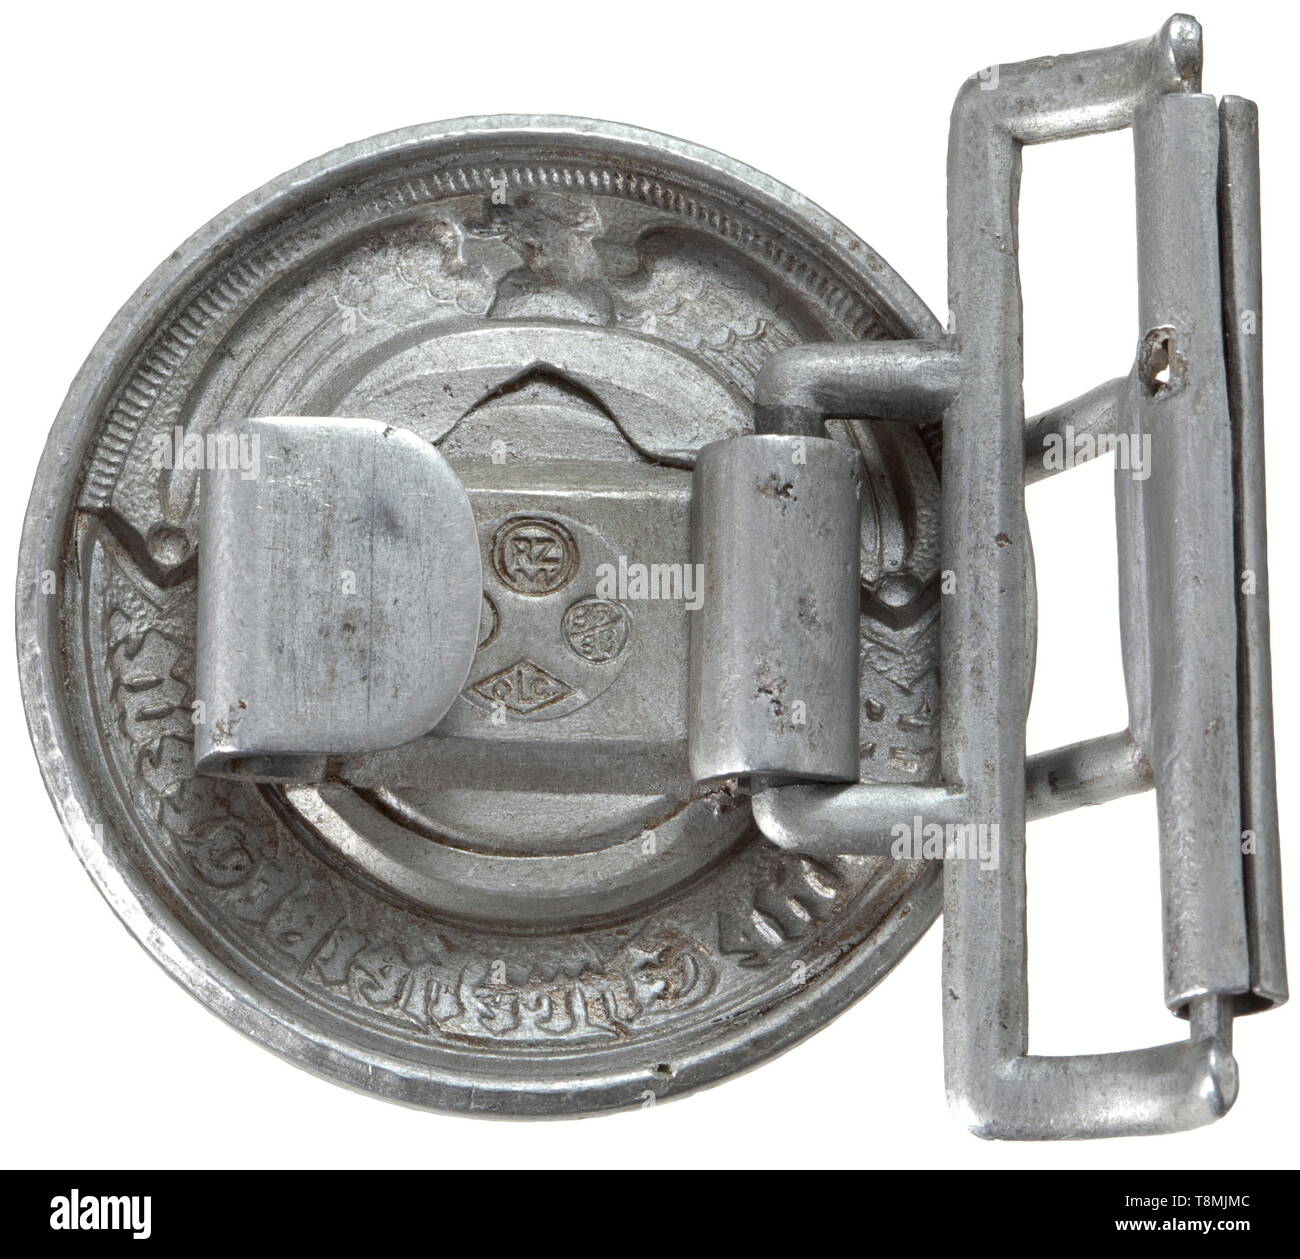 A leather waist belt for leaders Hollow-stamped aluminium buckle with crimped retaining plate and four punch markings upon it: 'RZM', '36/38', 'OLC' and 'SS'. Shortened black leather belt with two slides and a sewn-on pressure brake. historic, historical, 20th century, 1930s, 1940s, Waffen-SS, armed division of the SS, armed service, armed services, NS, National Socialism, Nazism, Third Reich, German Reich, Germany, military, militaria, utensil, piece of equipment, utensils, object, objects, stills, clipping, clippings, cut out, cut-out, cut-outs, fascism, fascistic, Nation, Editorial-Use-Only Stock Photo